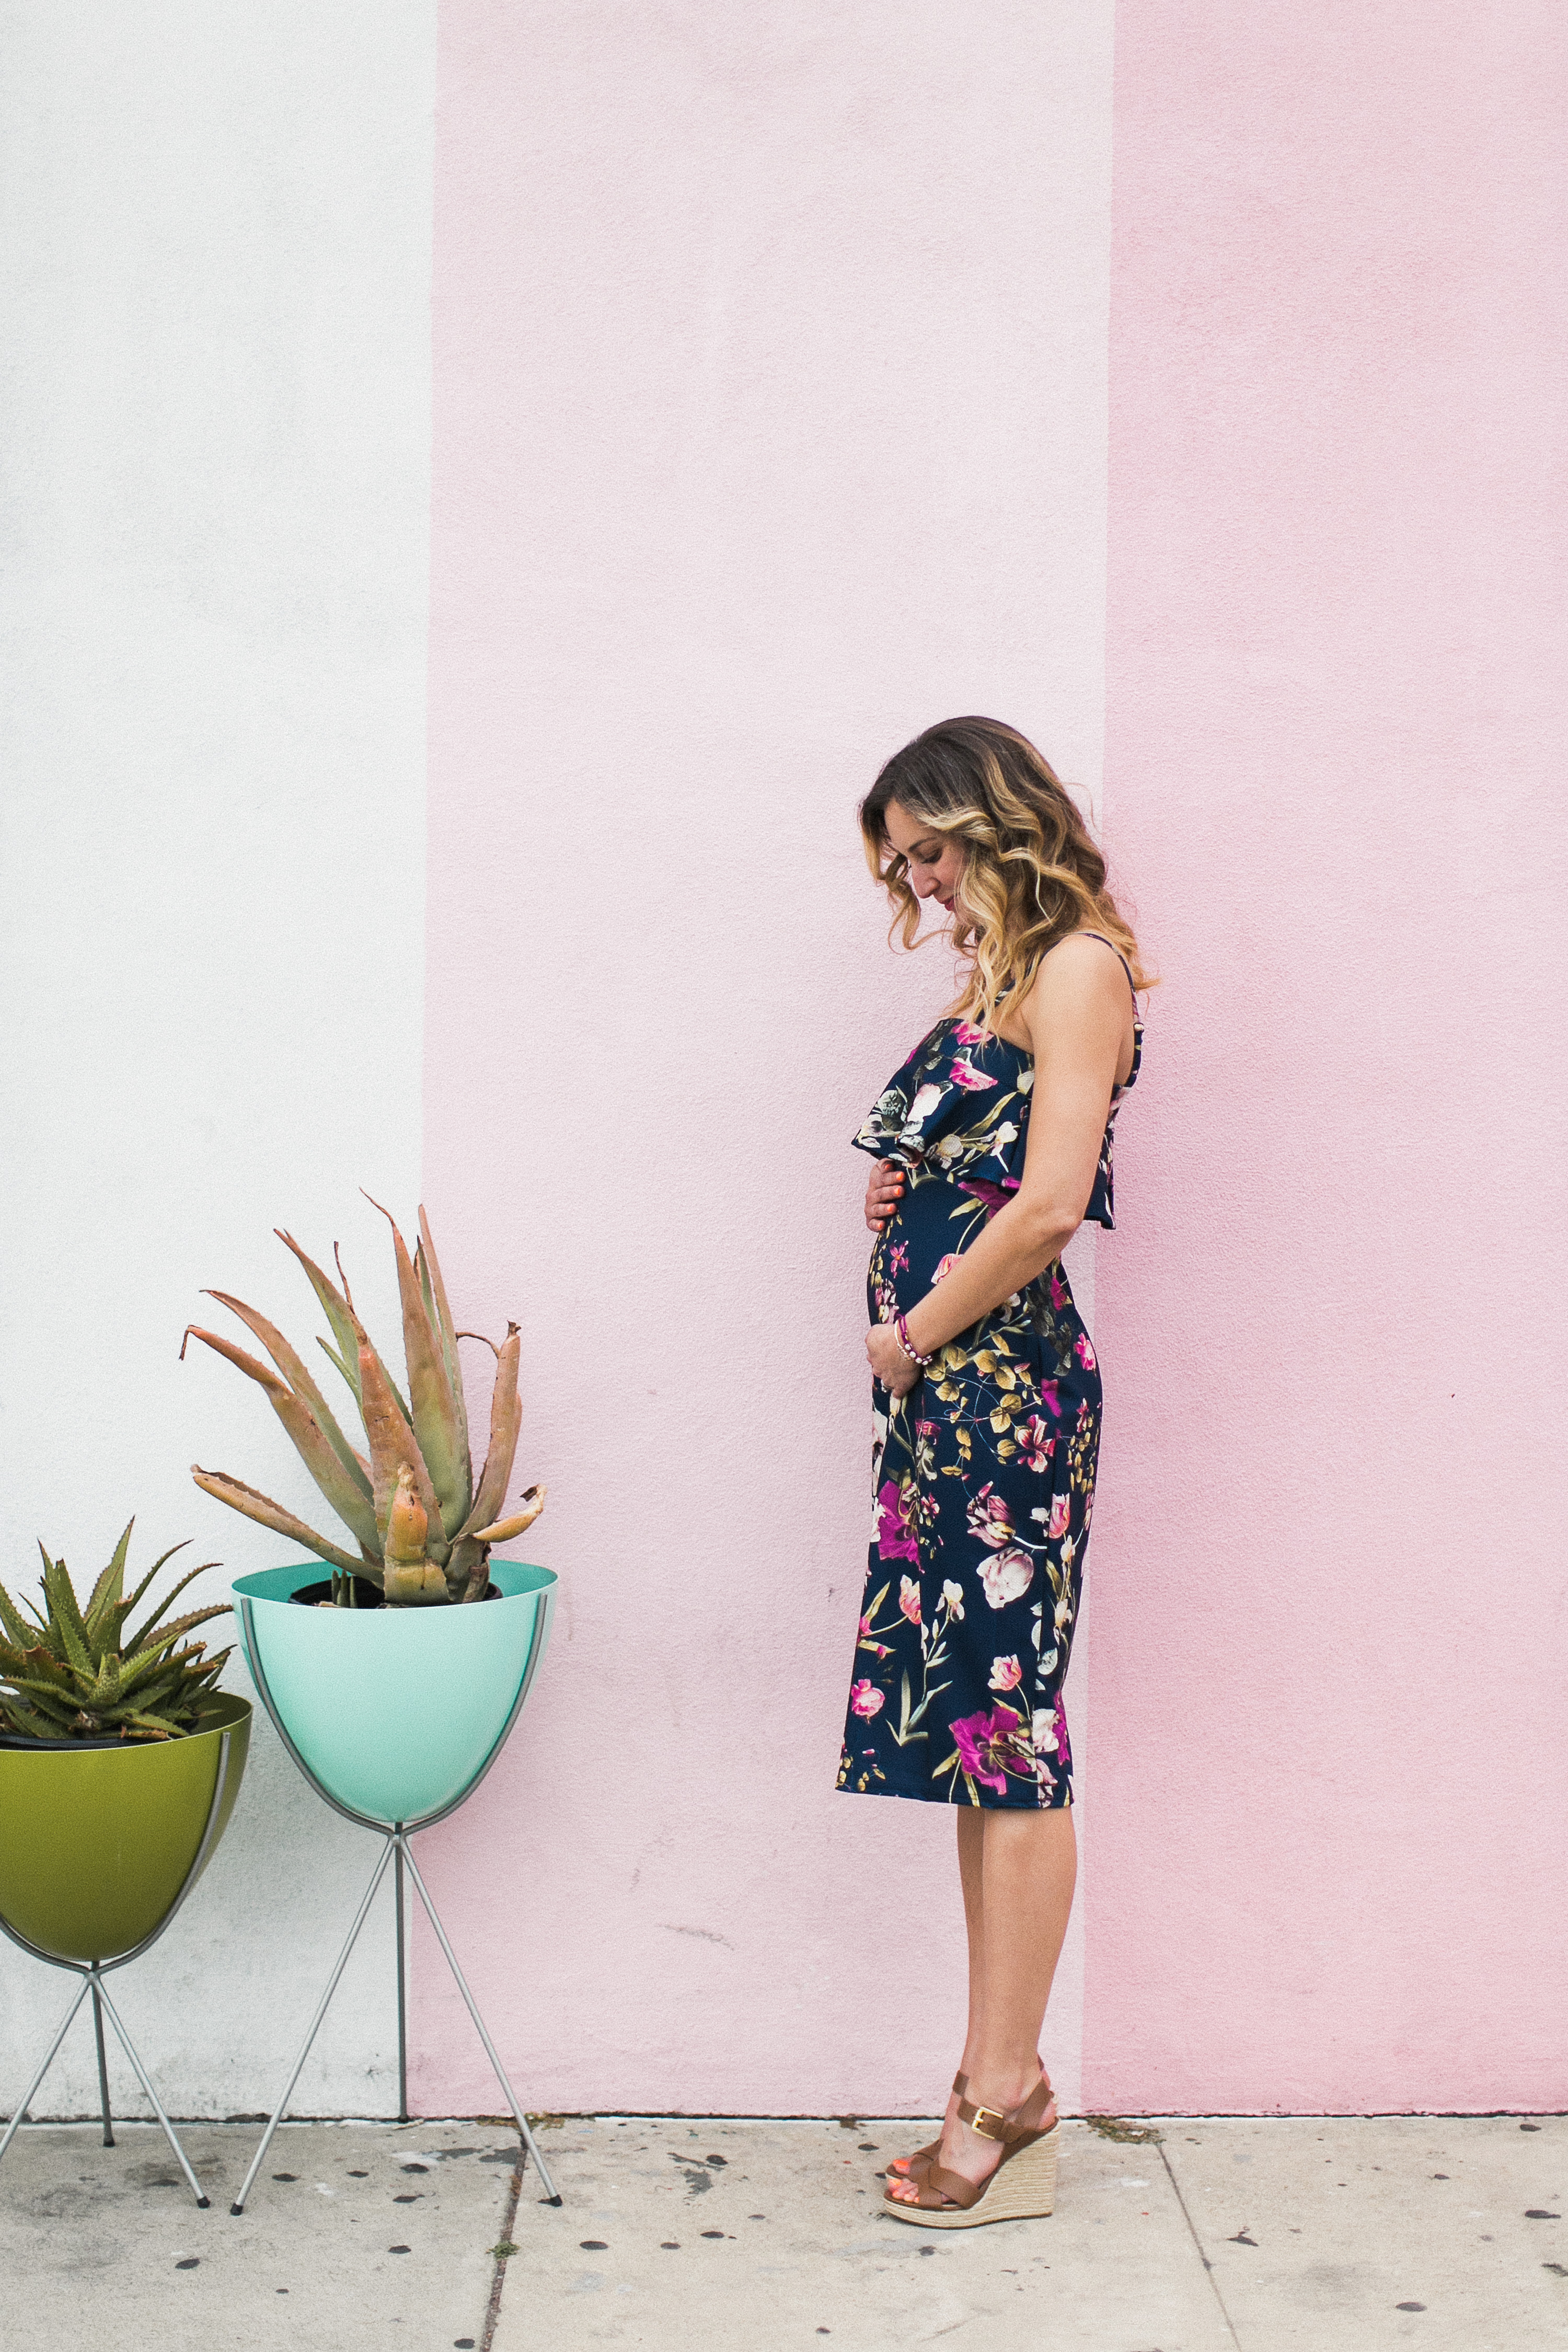 10 Tips For Surviving the First Trimester